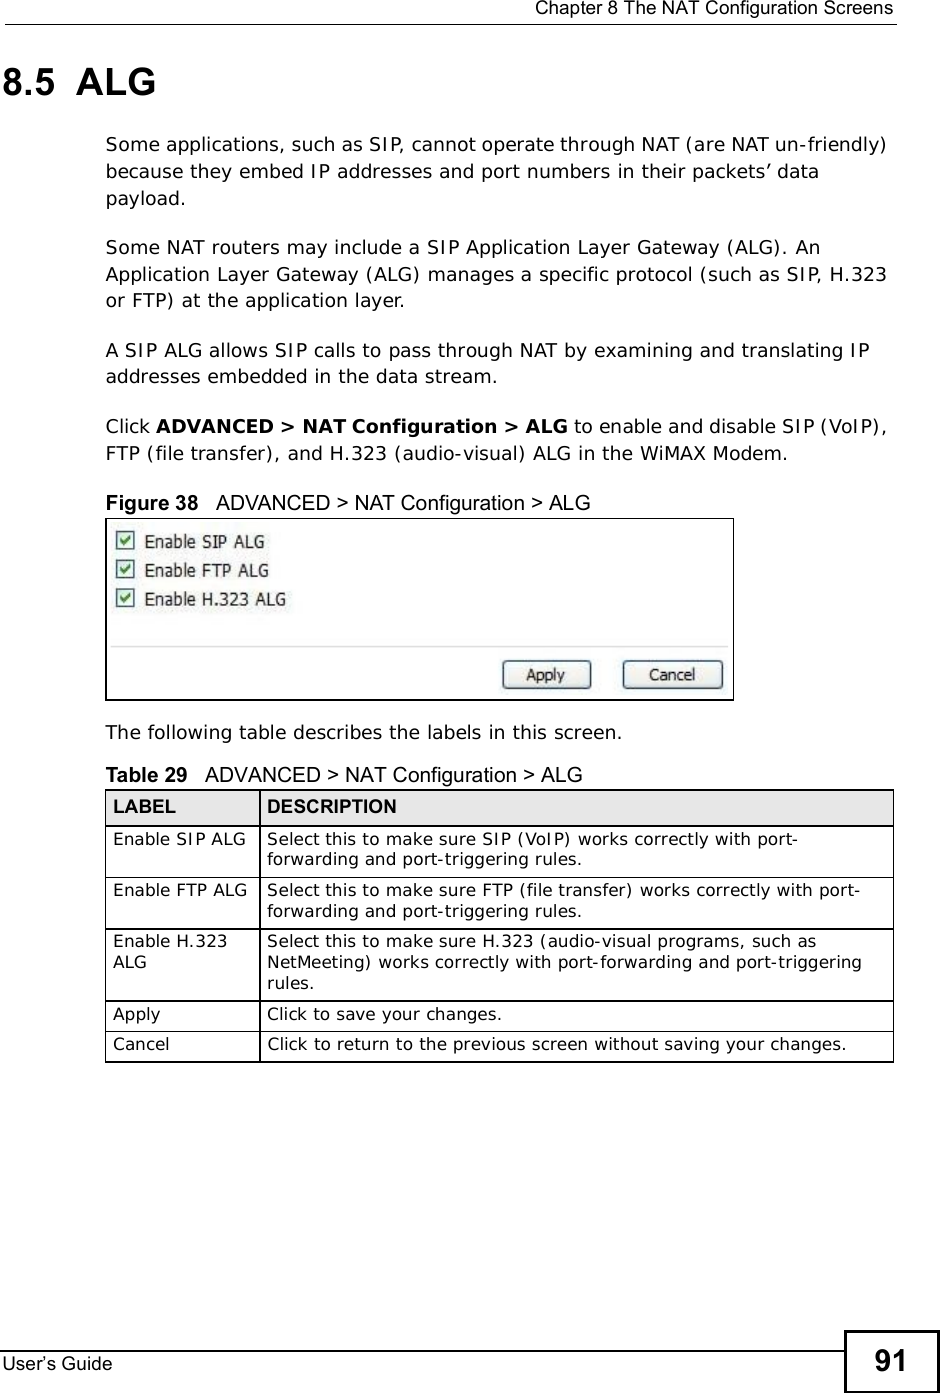  Chapter 8The NAT Configuration ScreensUser s Guide 918.5  ALGSome applications, such as SIP, cannot operate through NAT (are NAT un-friendly) because they embed IP addresses and port numbers in their packets’ data payload. Some NAT routers may include a SIP Application Layer Gateway (ALG). An Application Layer Gateway (ALG) manages a specific protocol (such as SIP, H.323 or FTP) at the application layer. A SIP ALG allows SIP calls to pass through NAT by examining and translating IP addresses embedded in the data stream.Click ADVANCED &gt; NAT Configuration &gt; ALG to enable and disable SIP (VoIP), FTP (file transfer), and H.323 (audio-visual) ALG in the WiMAX Modem.Figure 38   ADVANCED &gt; NAT Configuration &gt; ALGThe following table describes the labels in this screen.Table 29   ADVANCED &gt; NAT Configuration &gt; ALGLABEL DESCRIPTIONEnable SIP ALG Select this to make sure SIP (VoIP) works correctly with port-forwarding and port-triggering rules.Enable FTP ALG Select this to make sure FTP (file transfer) works correctly with port-forwarding and port-triggering rules.Enable H.323 ALG Select this to make sure H.323 (audio-visual programs, such as NetMeeting) works correctly with port-forwarding and port-triggering rules.Apply Click to save your changes.CancelClick to return to the previous screen without saving your changes.